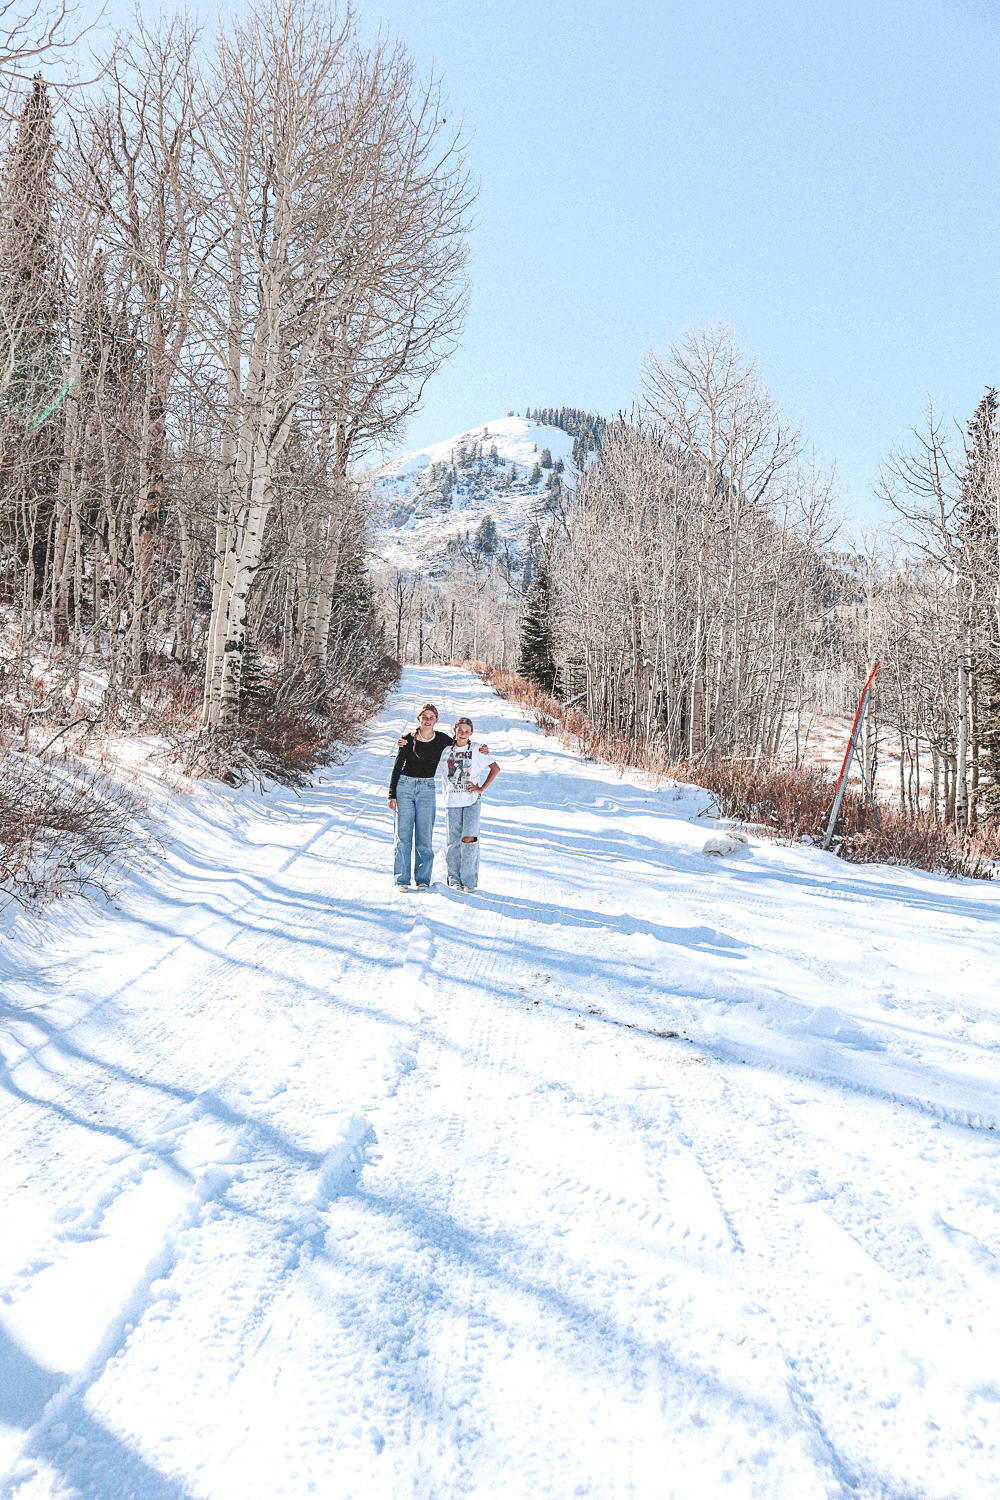 Pacific Globetrotters, budget family travel blog, shares 5 Days in Park City In The Winter With A Dog. Snake Creek Trail